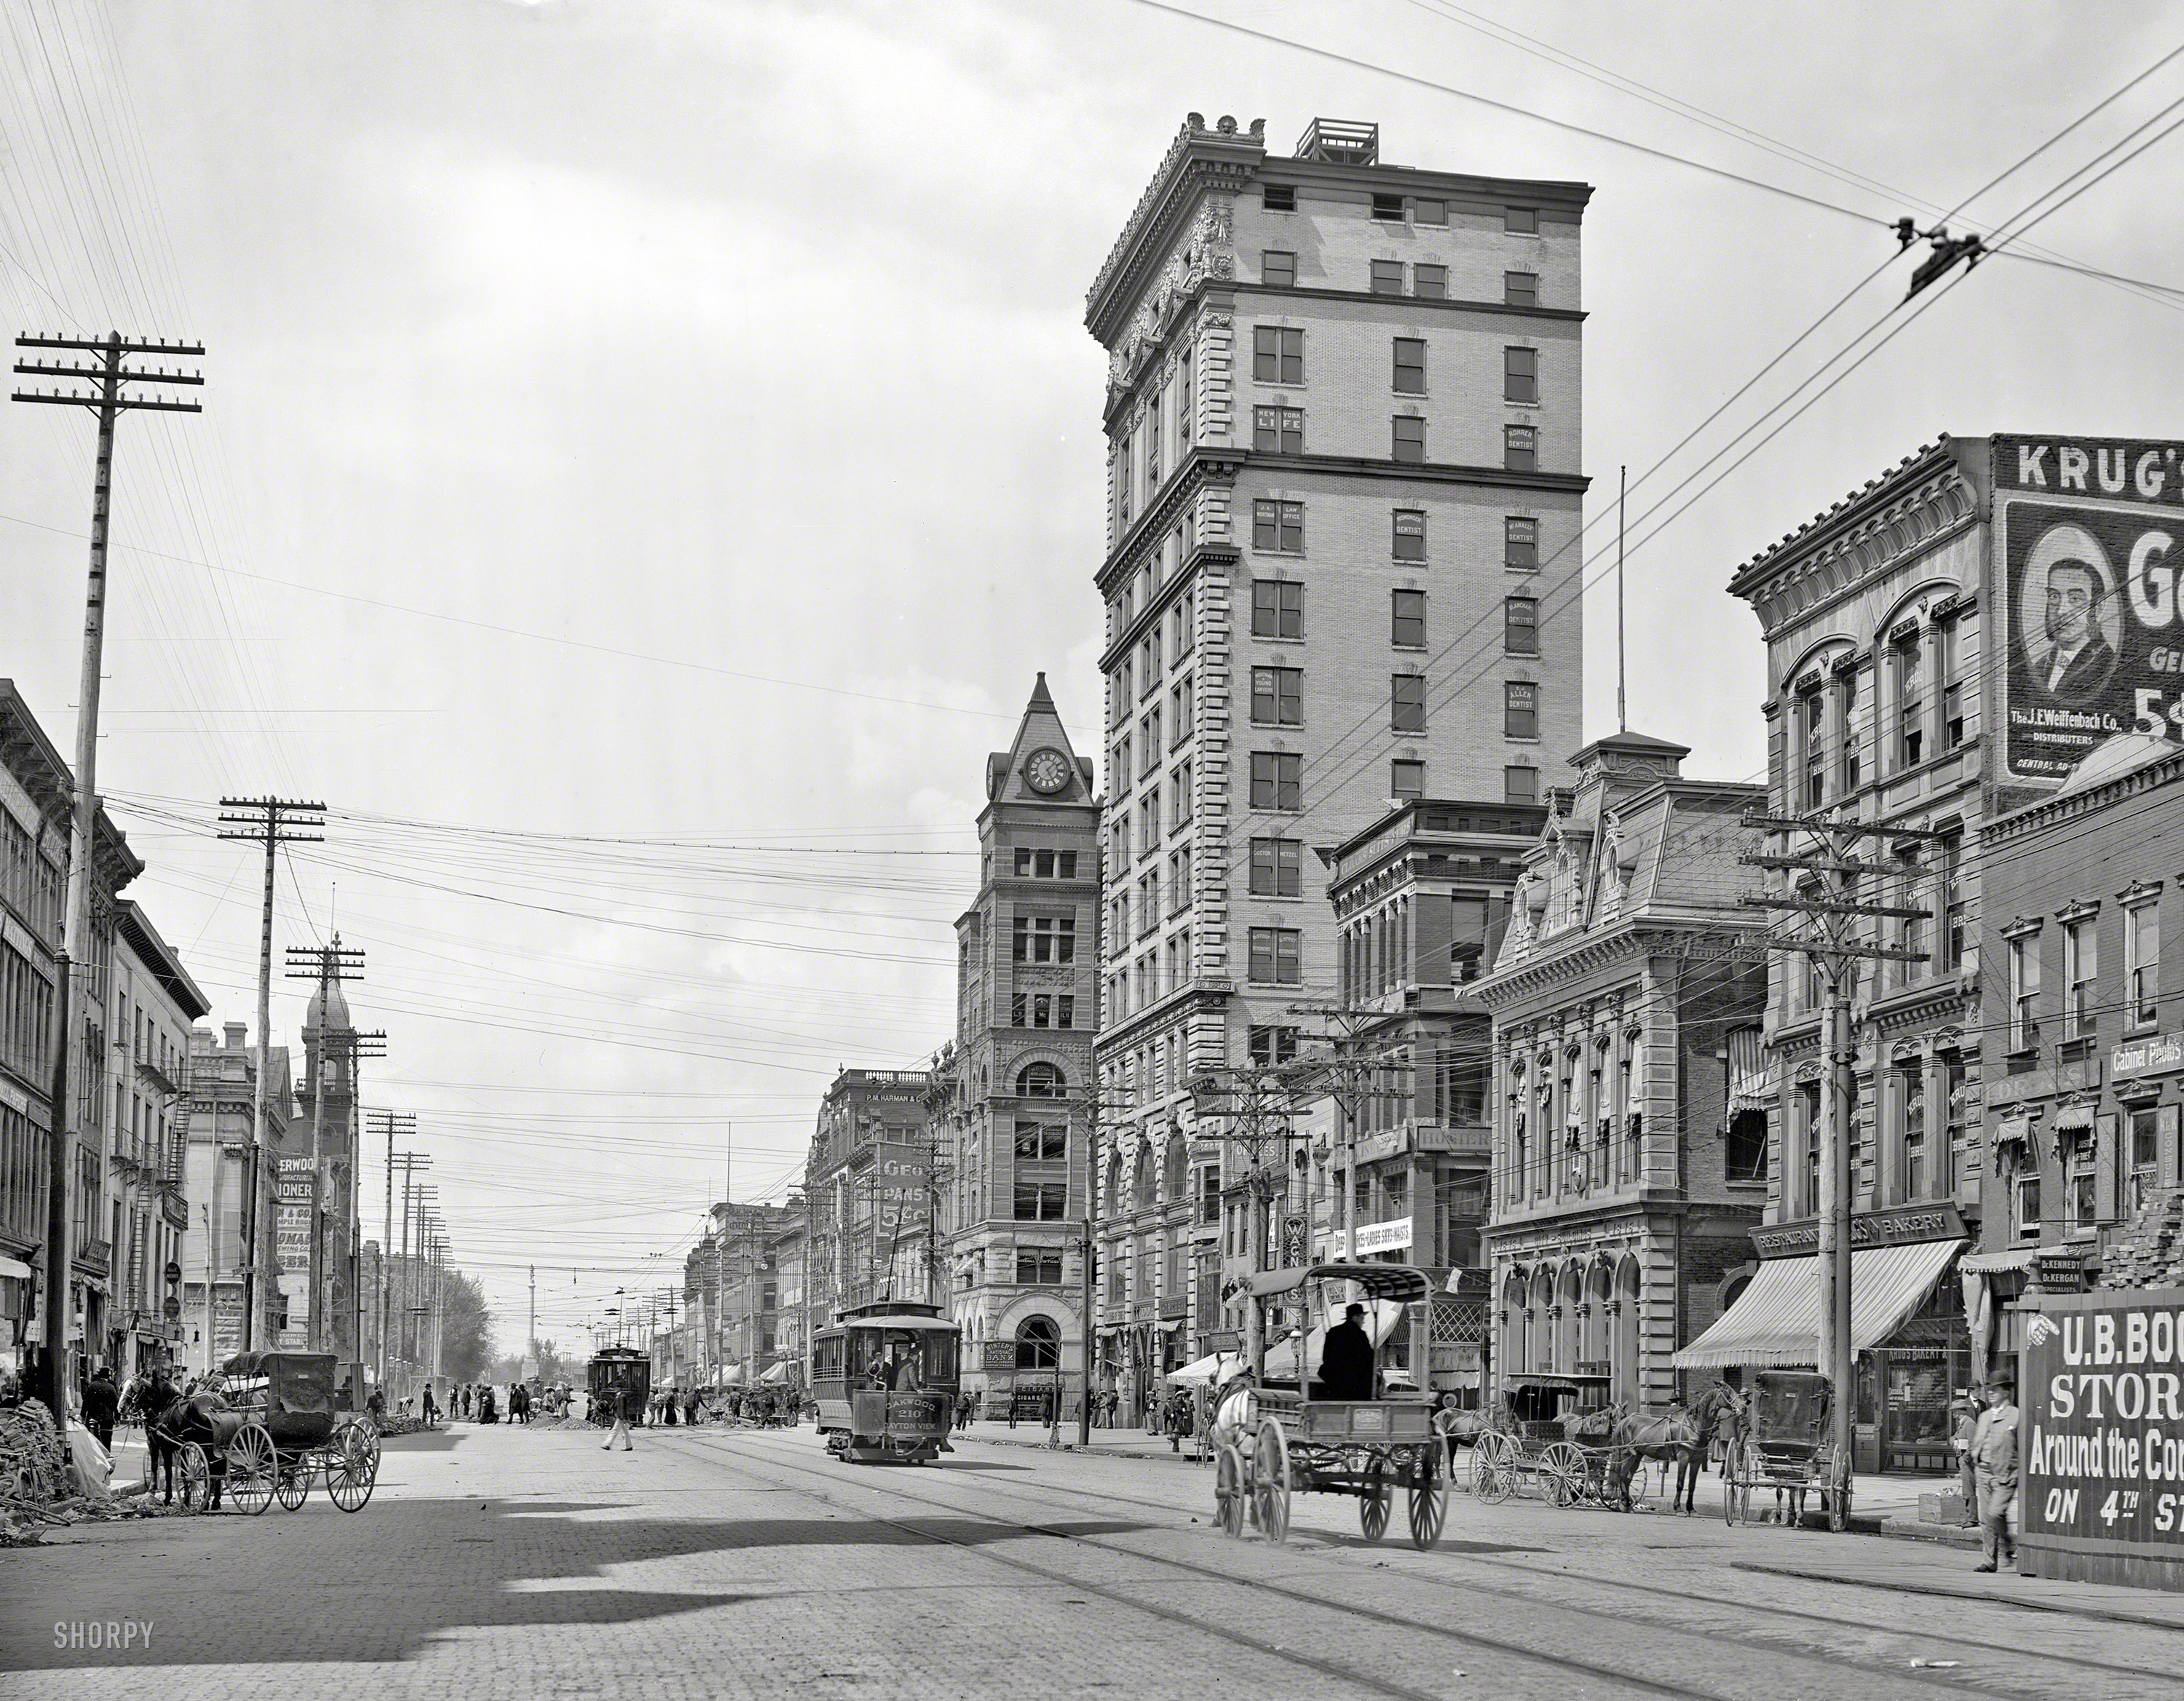 1904. "Main Street -- Dayton, Ohio." Home of the Tooth Tower. 8x10 inch dry plate glass negative, Detroit Publishing Company. View full size.